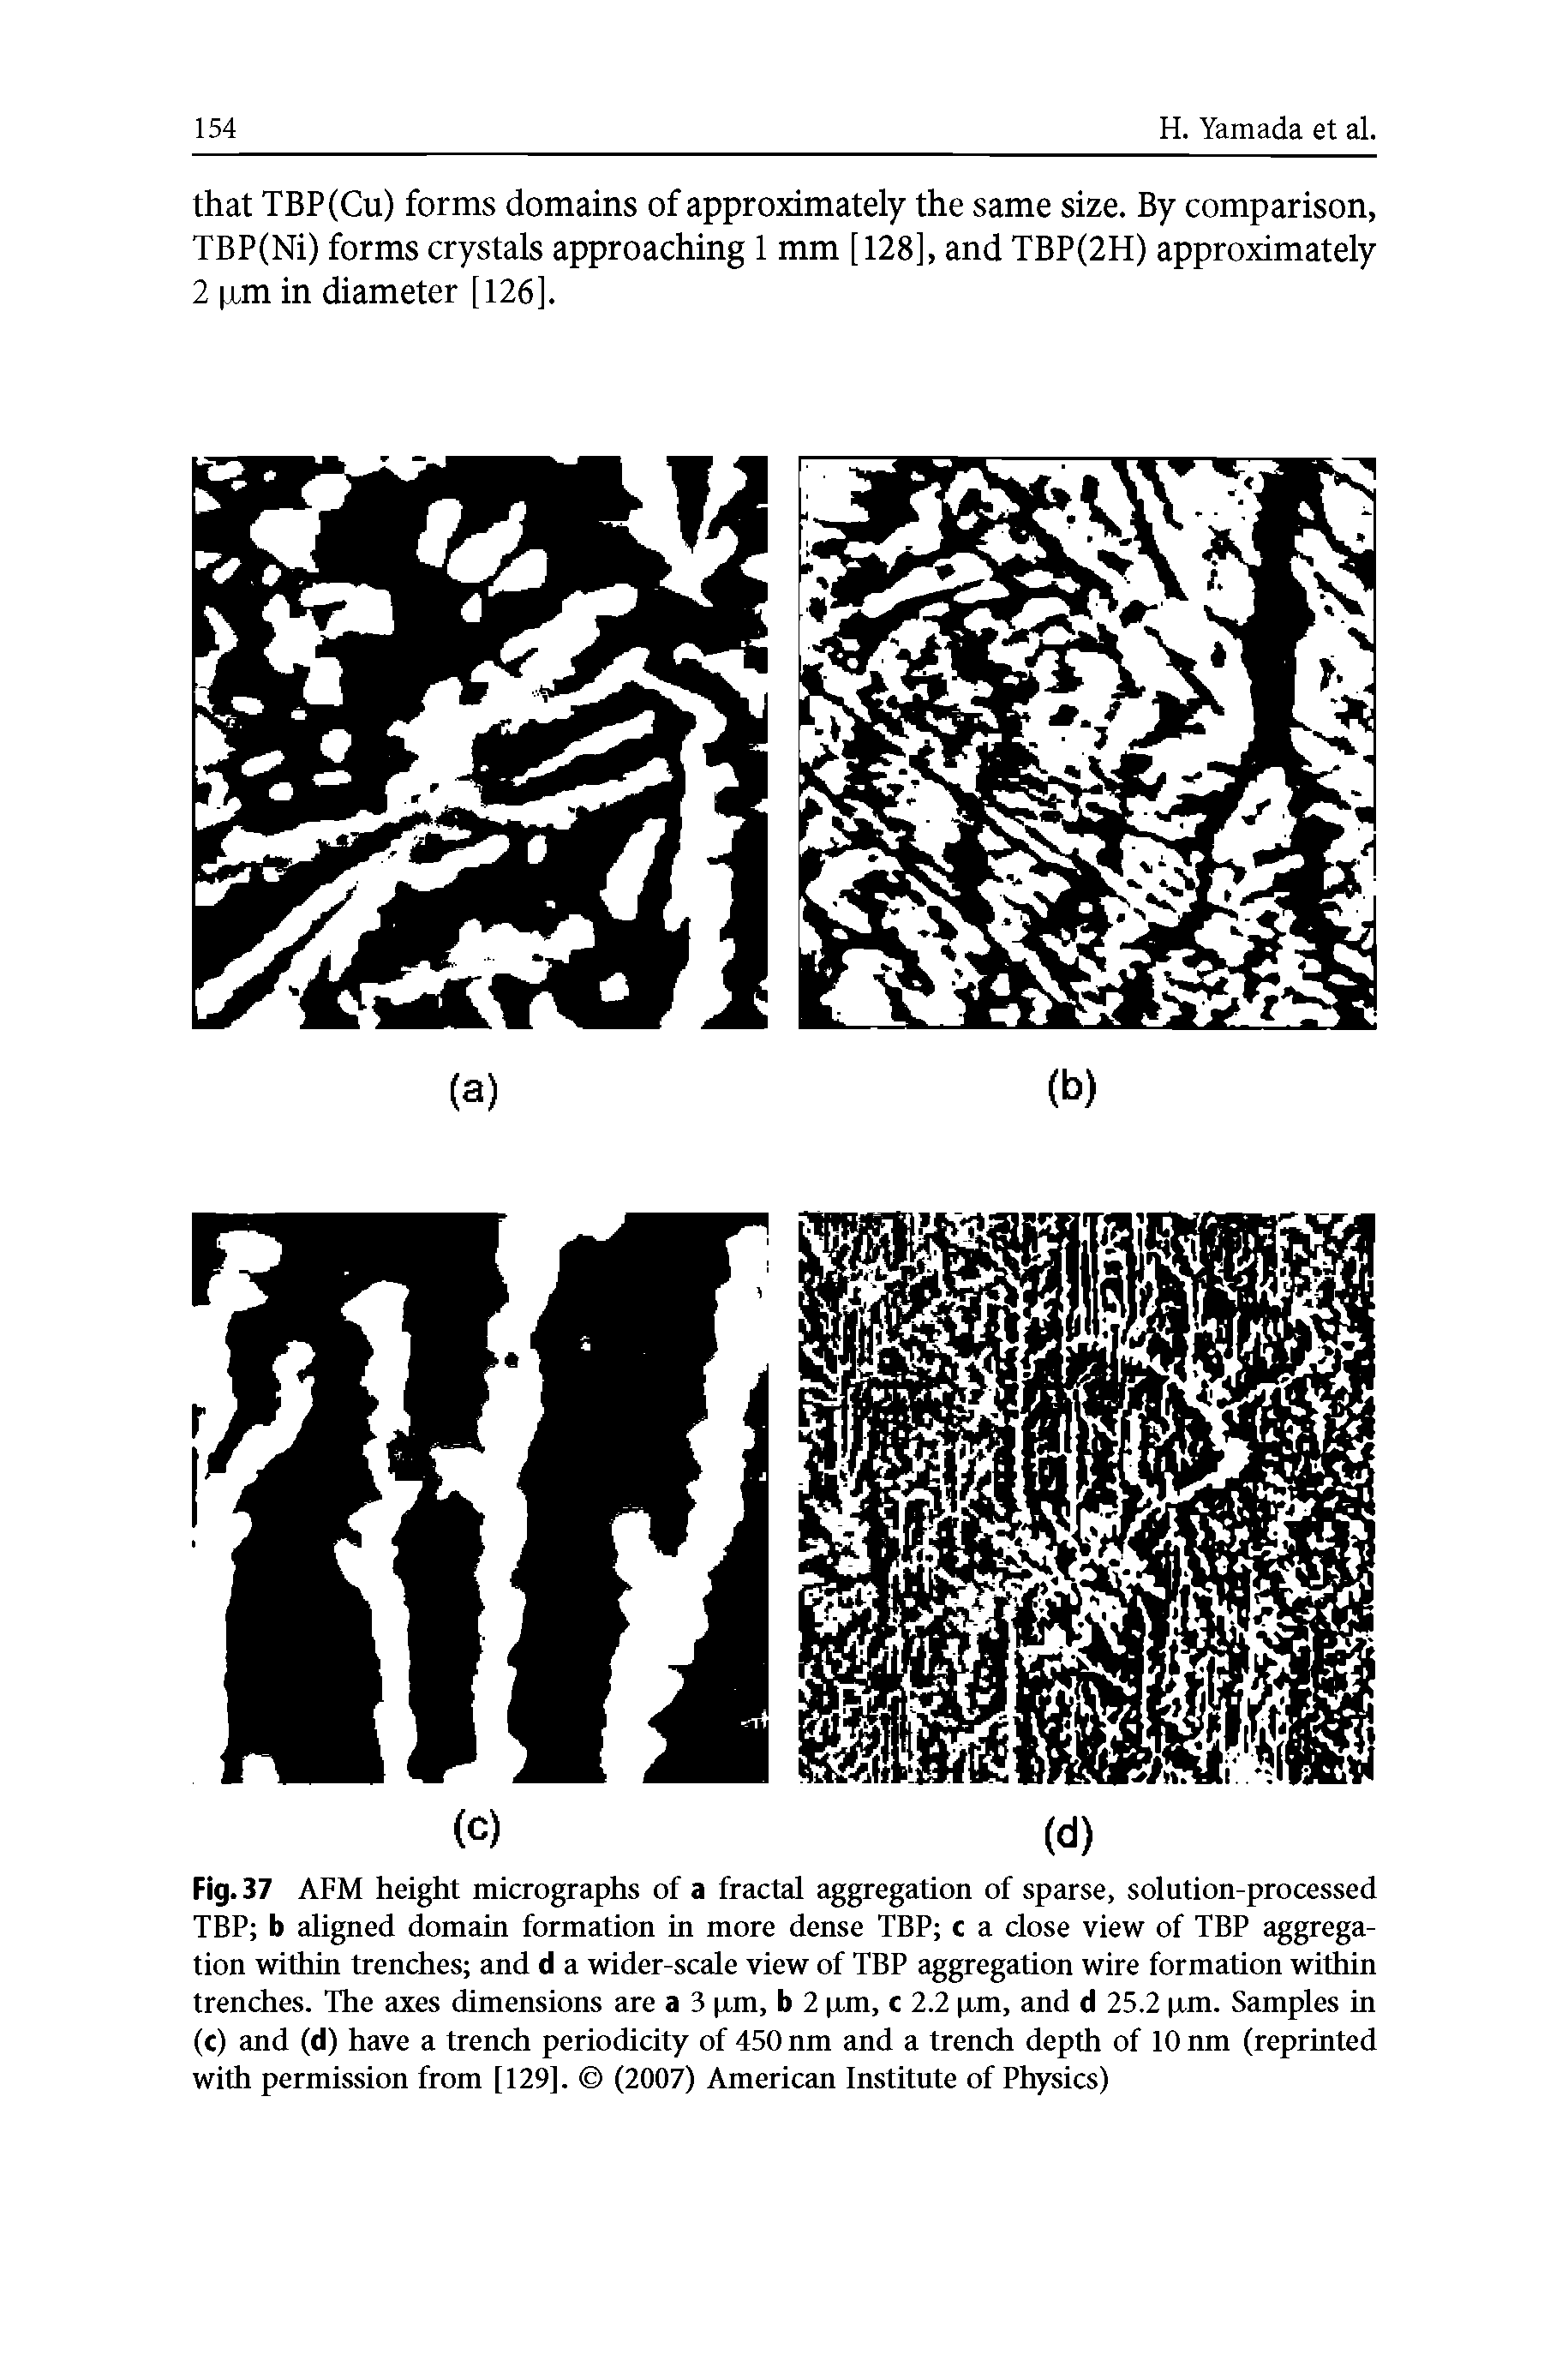 Fig. 37 AFM height micrographs of a fractal aggregation of sparse, solution-processed TBP b aligned domain formation in more dense TBP c a close view of TBP aggregation within trenches and d a wider-scale view of TBP aggregation wire formation within trenches. The axes dimensions are a 3 ixm, b 2 ixm, c 2.2 ixm, and d 25.2 xm. Samples in (c) and (d) have a trench periodicity of 450 nm and a trench depth of 10 nm (reprinted with permission from [129]. (2007) American Institute of Physics)...